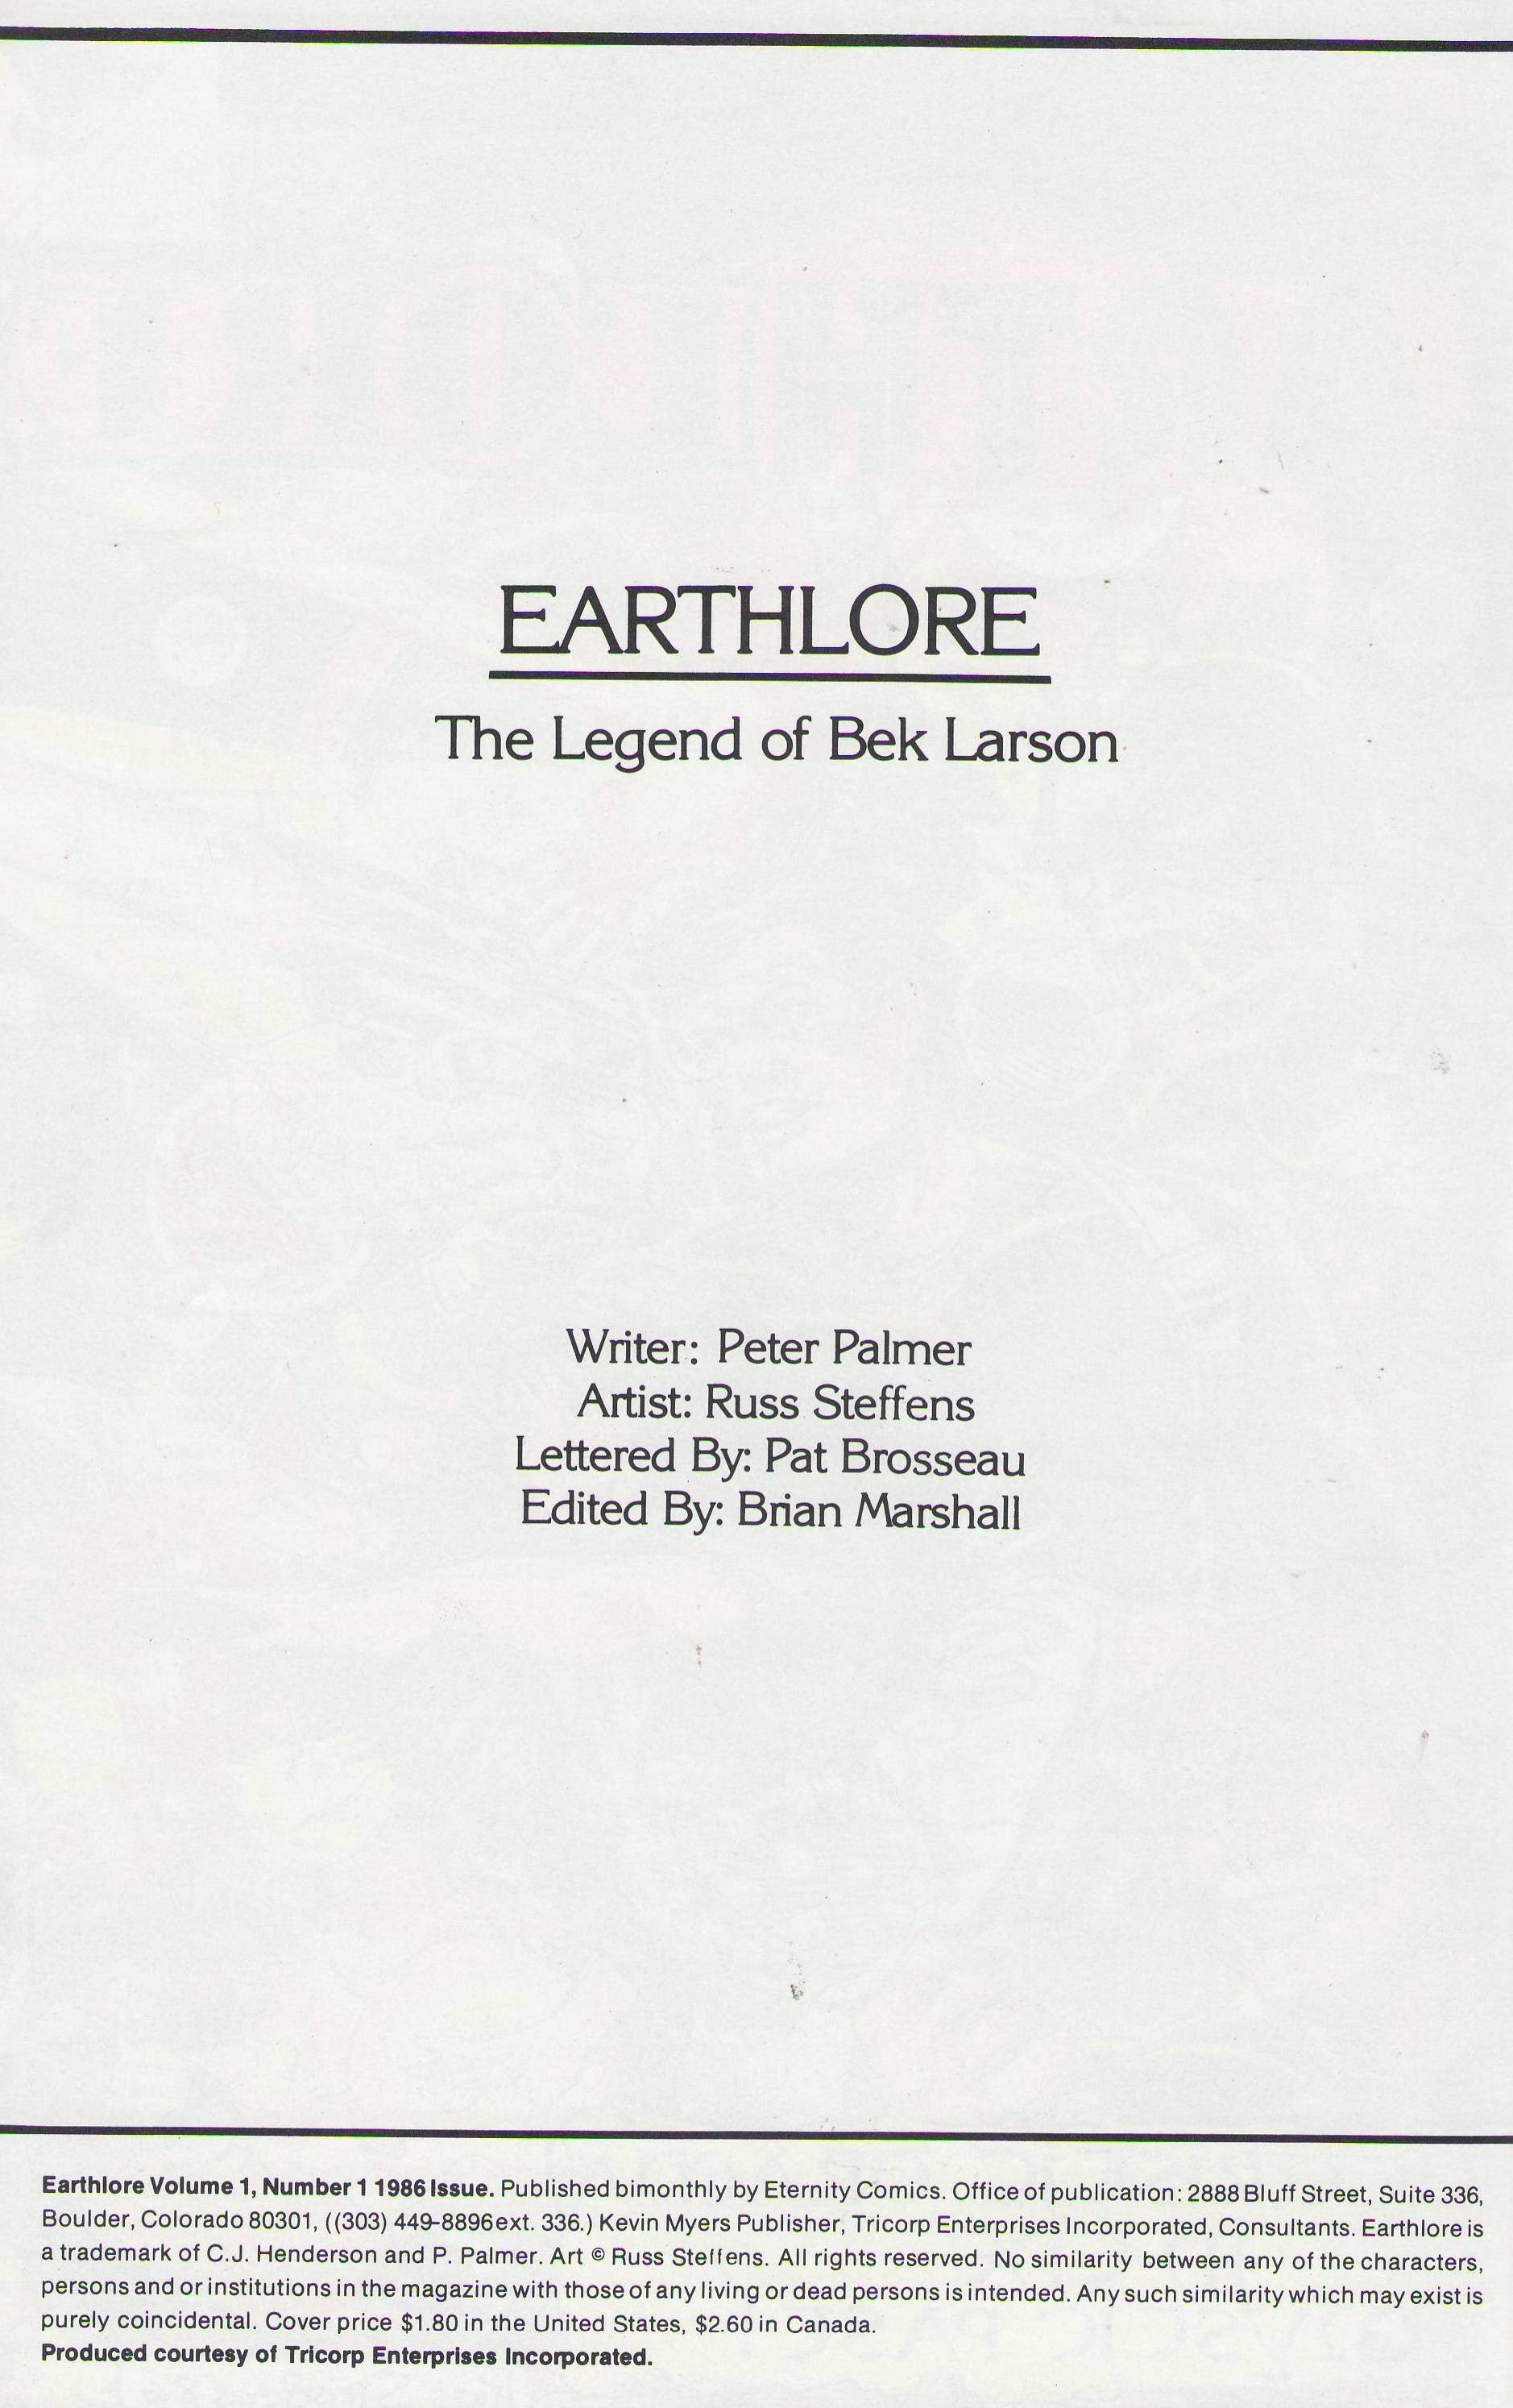 Read online Earthlore comic -  Issue #1 - 2